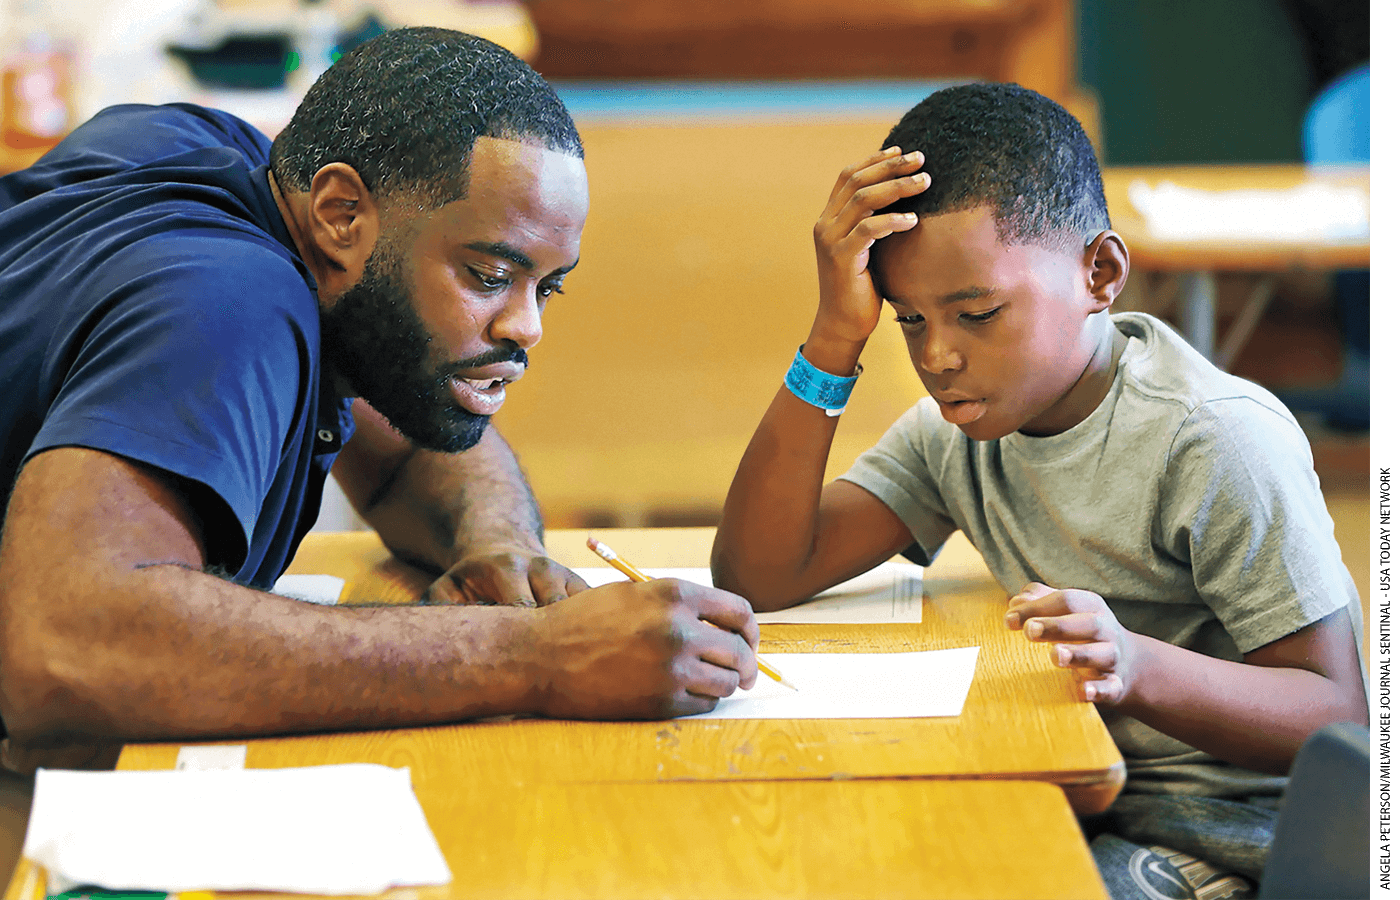 Marquise Mayes, 8, works on math homework with his teacher at Lloyd Barbee Montessori School in Milwaukee, Wisconsin.